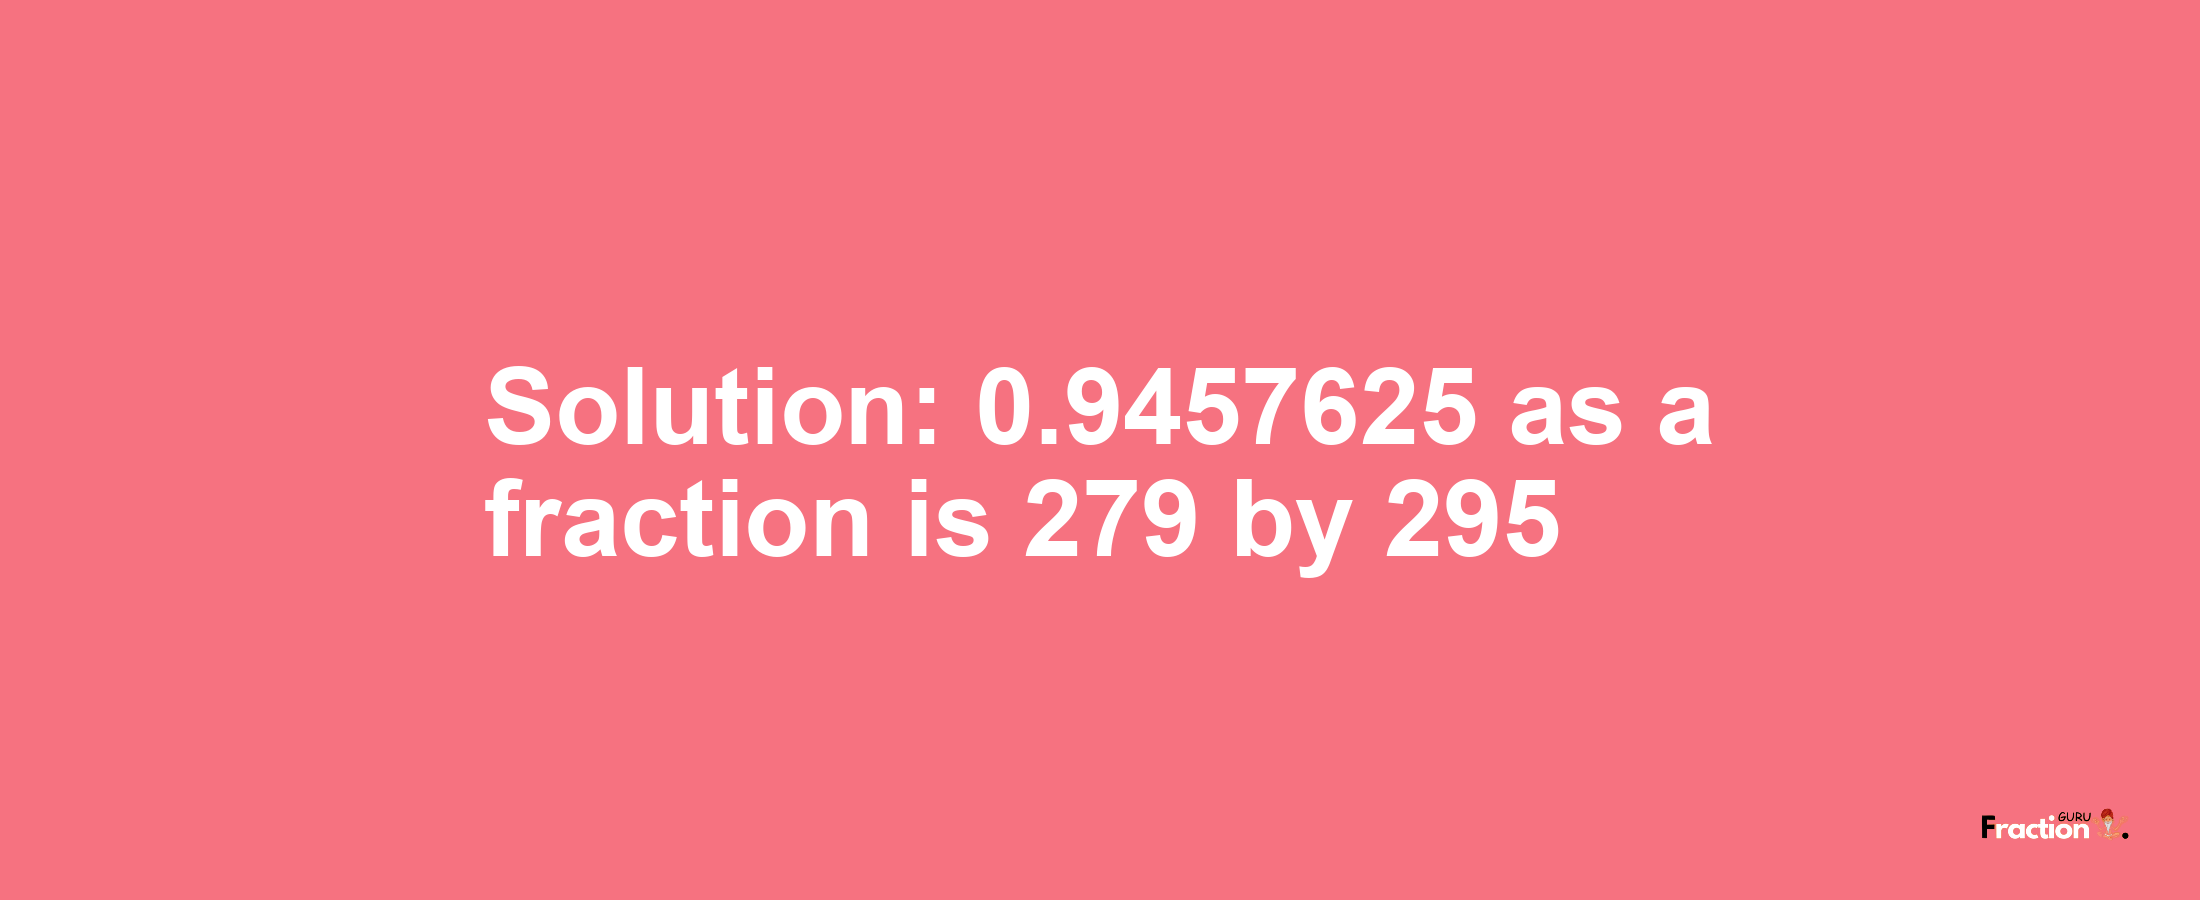 Solution:0.9457625 as a fraction is 279/295